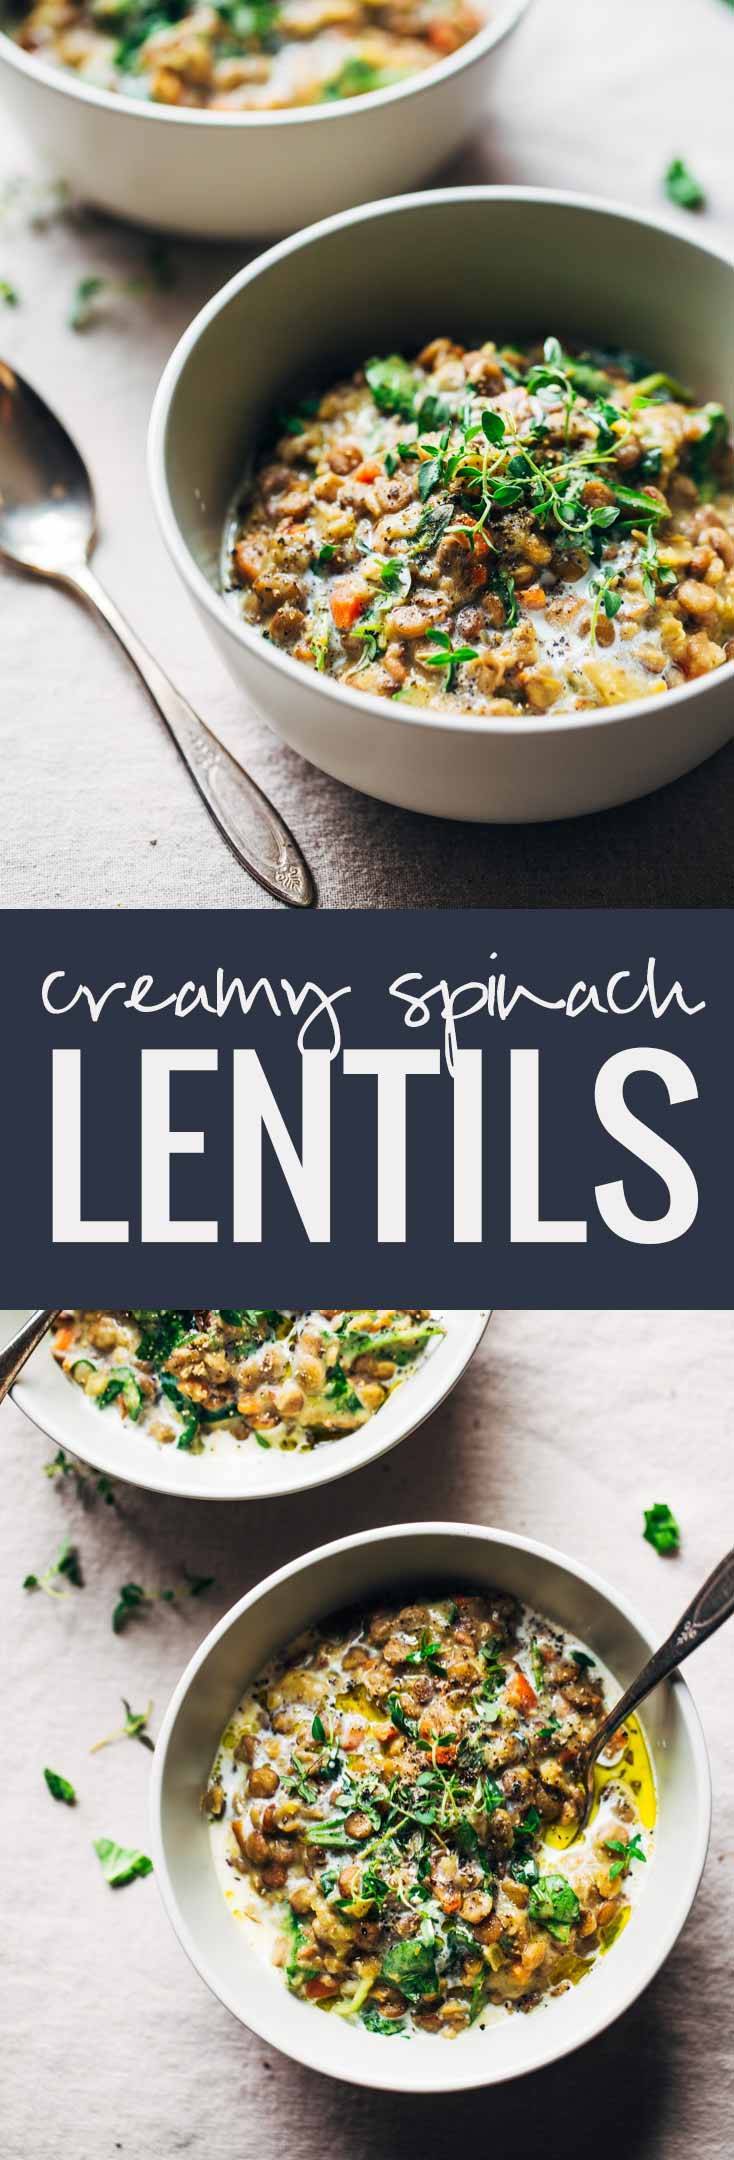 One-Pot Creamy Spinach Lentils - just a few veggies and pantry ingredients is all you need to make these super delicious and healthy lentils!